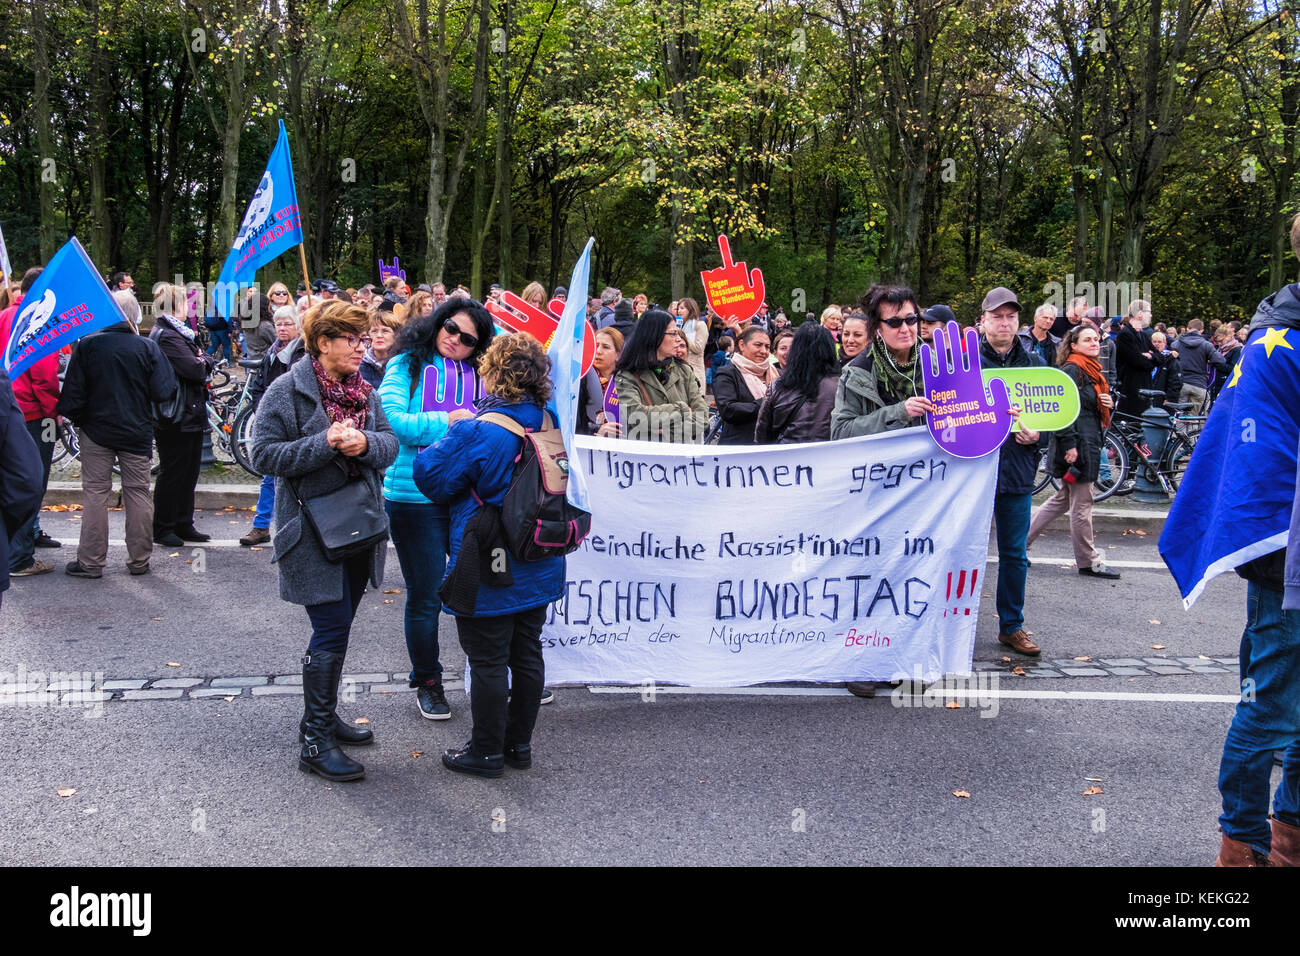 Berlin, Mitte. 22nd October 2017. Berliners protest against hate and racism In Parliament. Several thousand people collected at the Brandenburg Gate today to protest against racism in Parliament. The newly elected German parliament holds its first session on Tuesday 24th October and protestors marched past the Reichstag building to protest against the nationalist, anti-immigration AfD party who will appear in parliament for the first time having taken 12.6 percent of the vote in the recent election. Credit: Eden Breitz/Alamy Live News Stock Photo